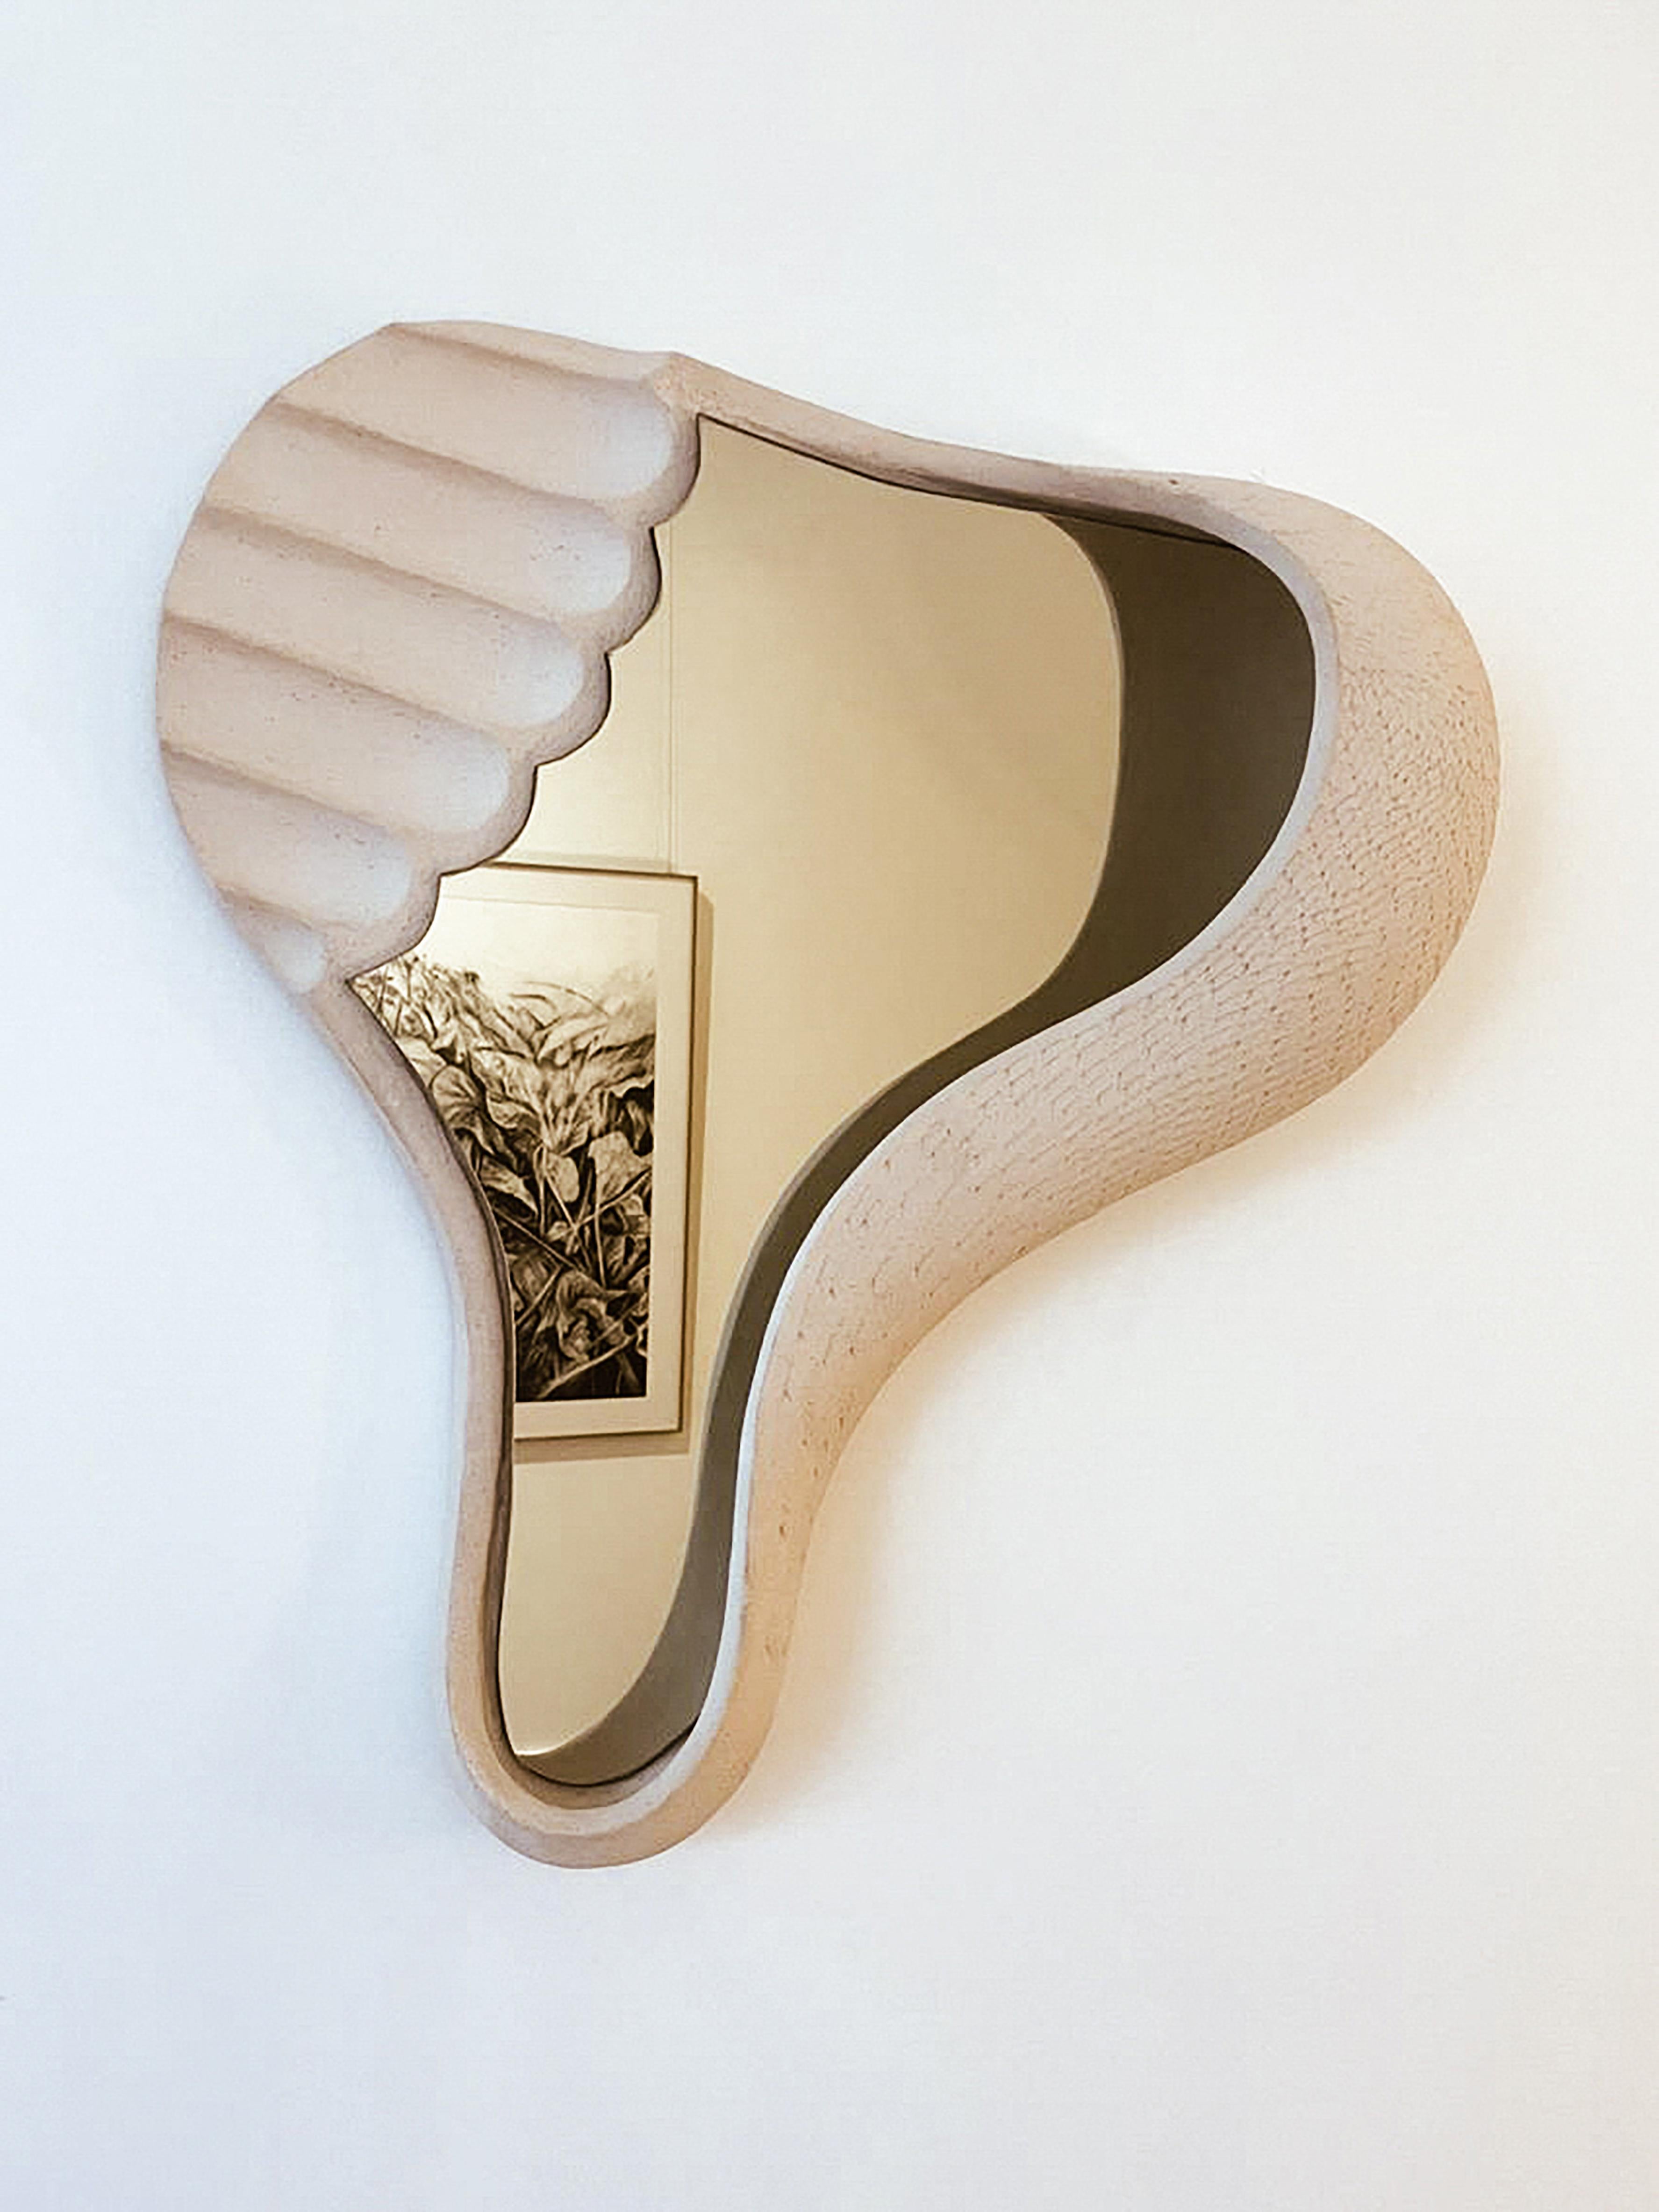 South African Contemporary Ceramic DUNE 01 Mirror Handcrafted by Jan Ernst For Sale